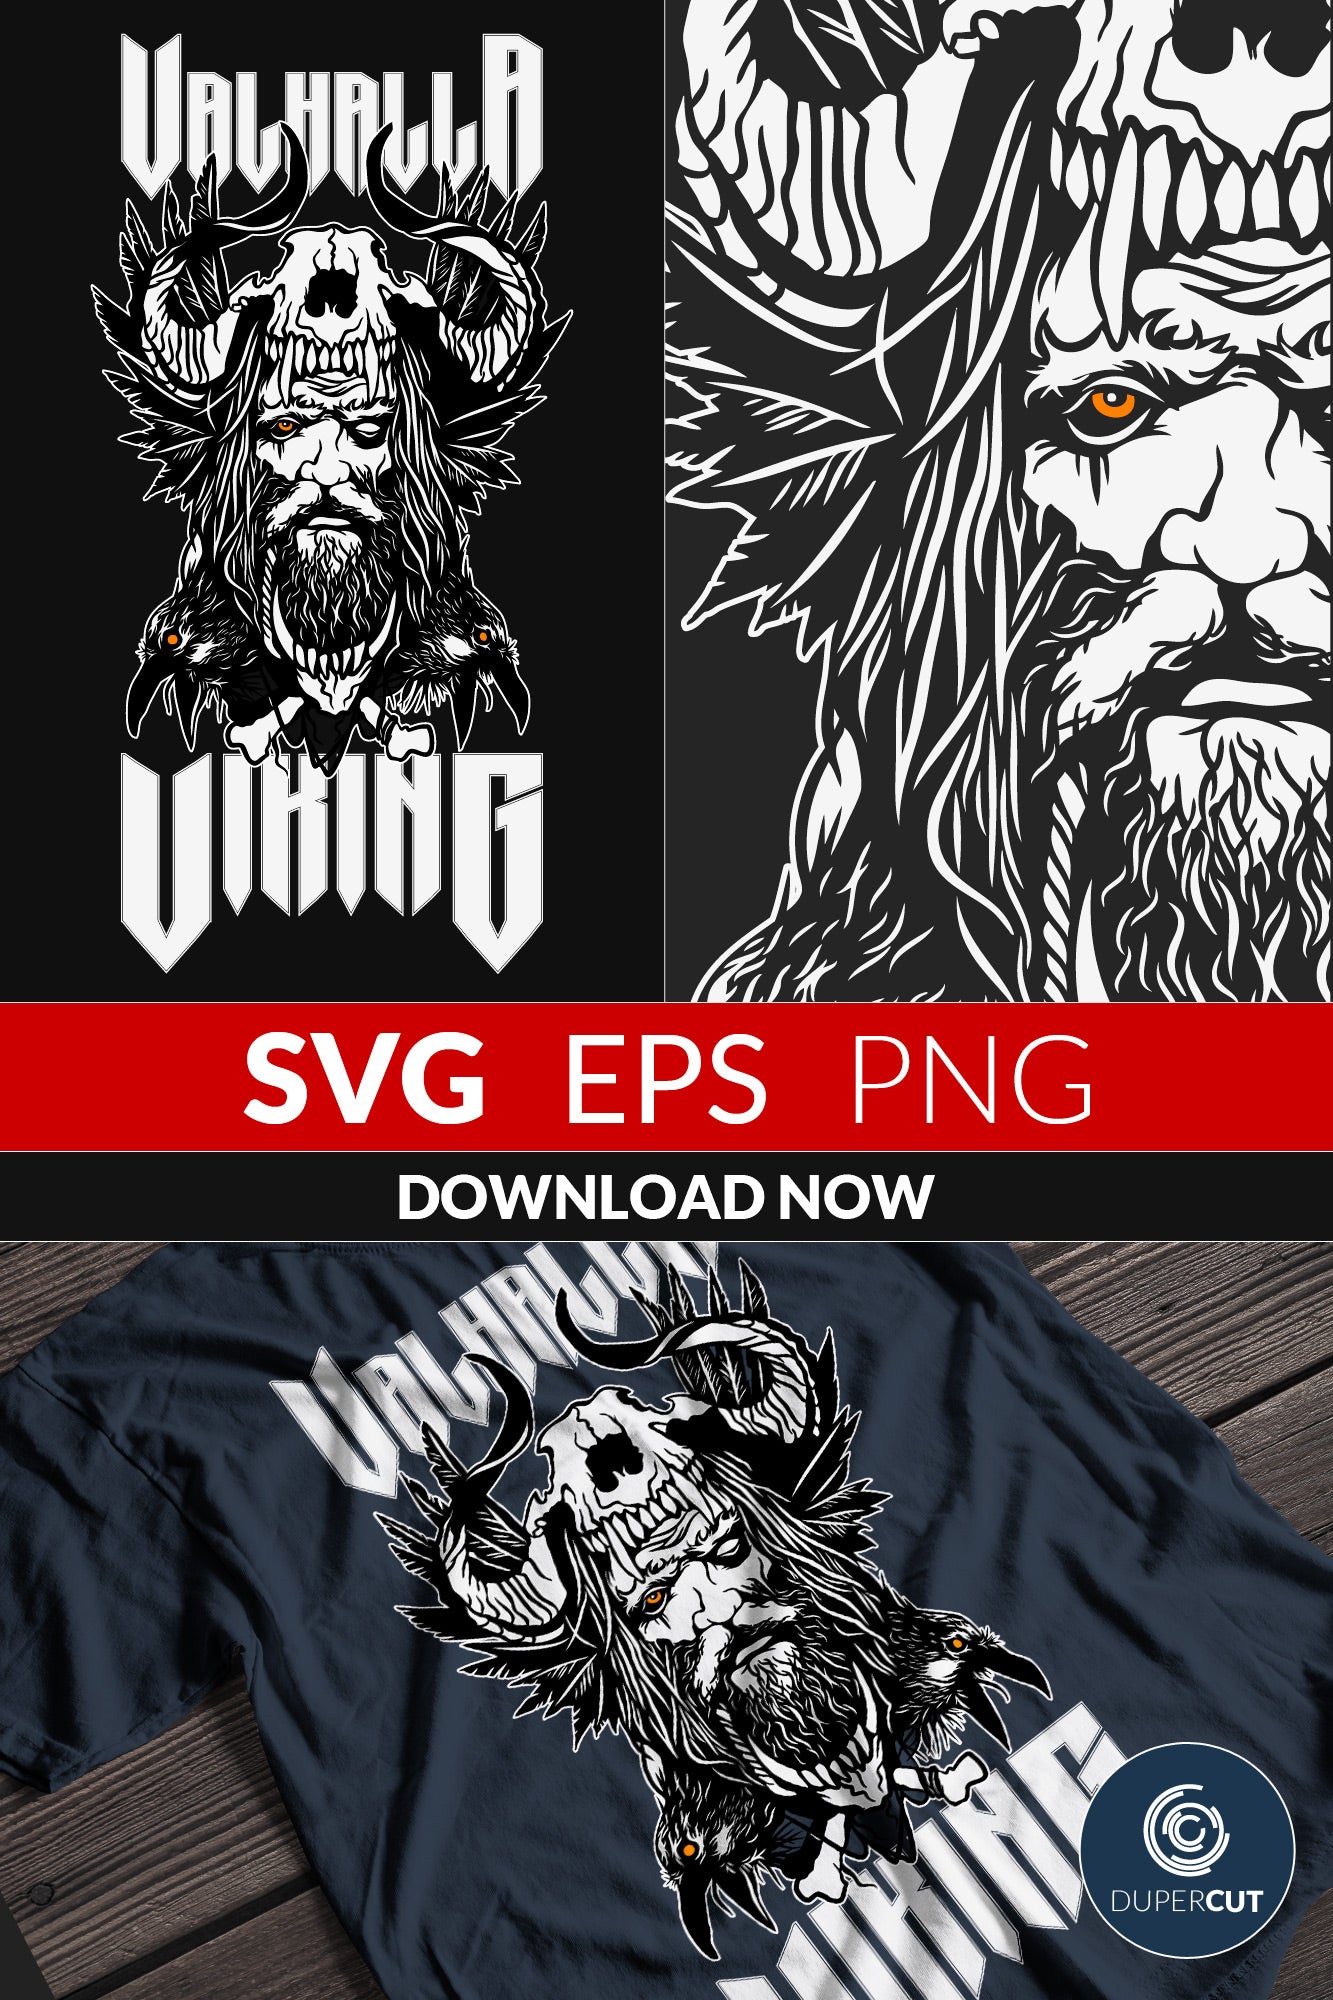 Vlhalla Viking - digital download for custom apparel - EPS, SVG, PNG files. Vector Colour illustration for print on demand, sublimation, custom t-shirts, hoodies, tumblers.